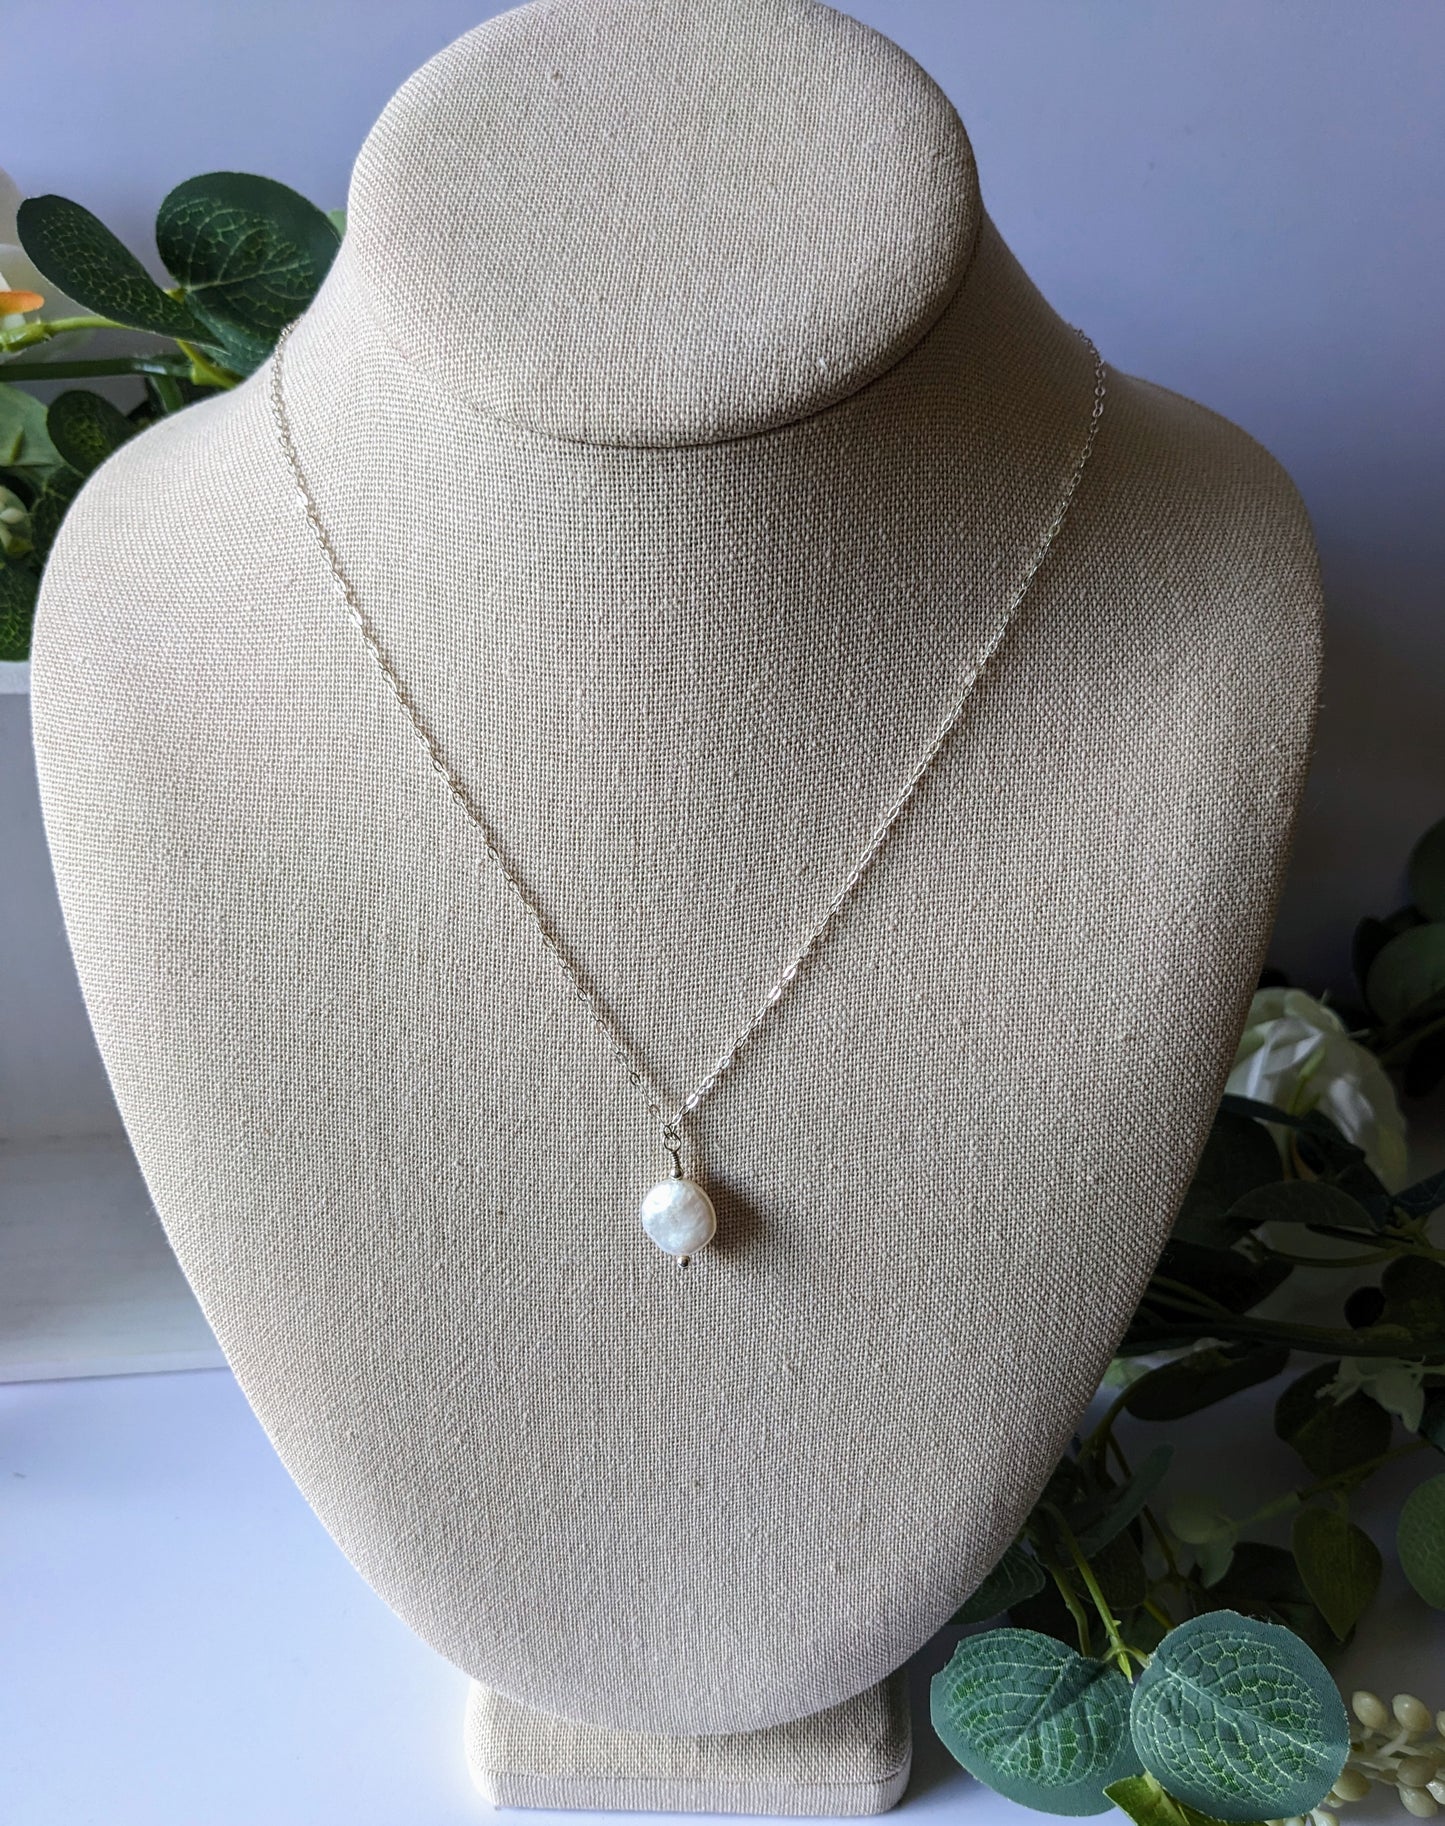 Coin Pearl Sterling Silver Necklace